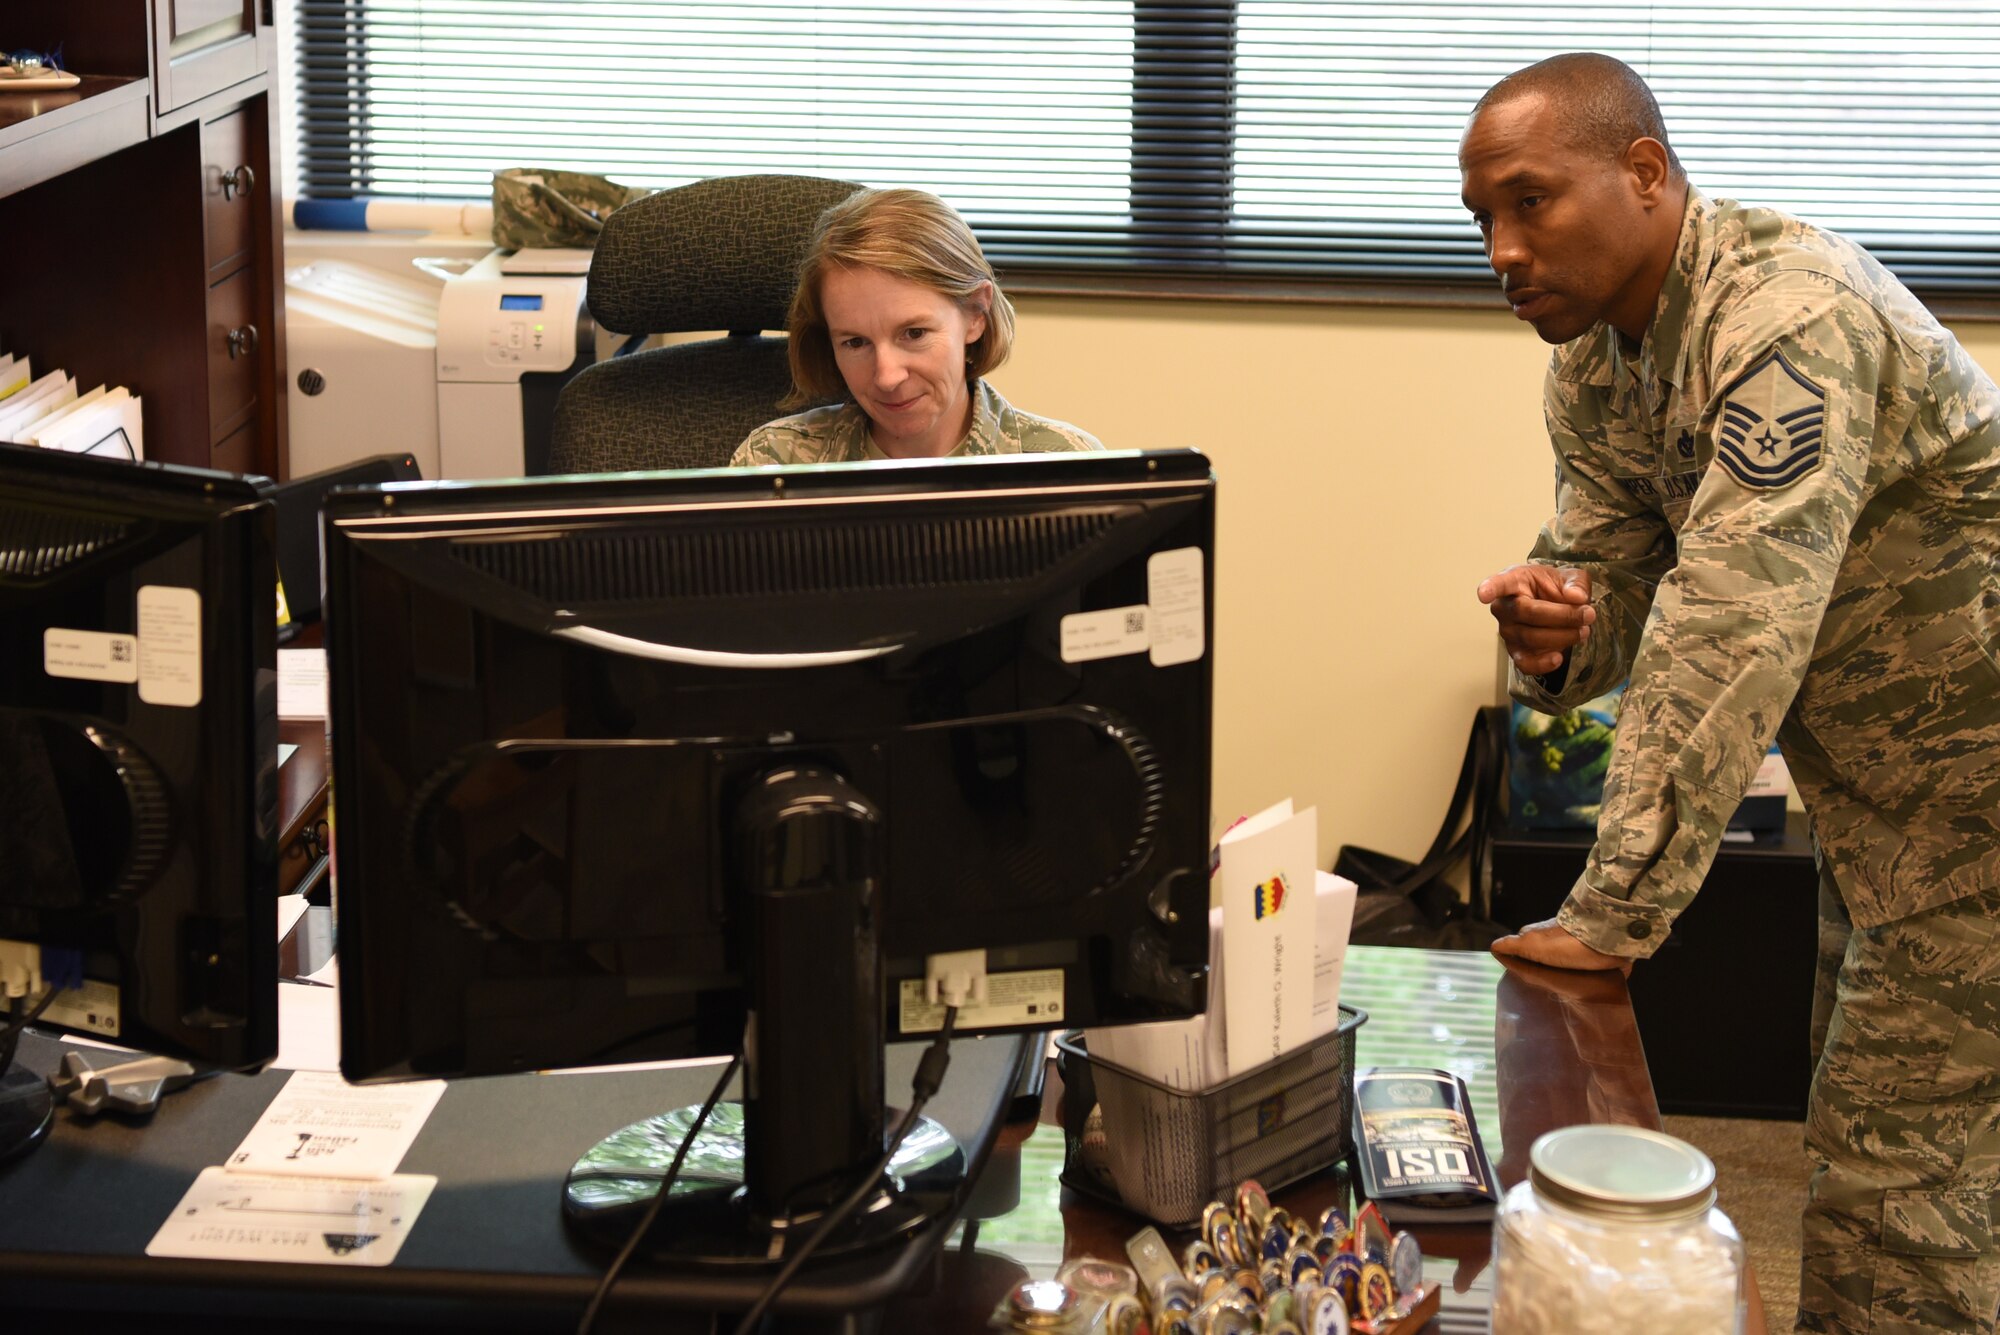 U.S. Air Force Senior Master Sgt. Brandy Hill, left, and Master Sgt. Jamell Camper, right, 20th Force Support Squadron career assistance advisors (CAA), review records at Shaw Air Force Base, S.C., Aug. 3, 2018.